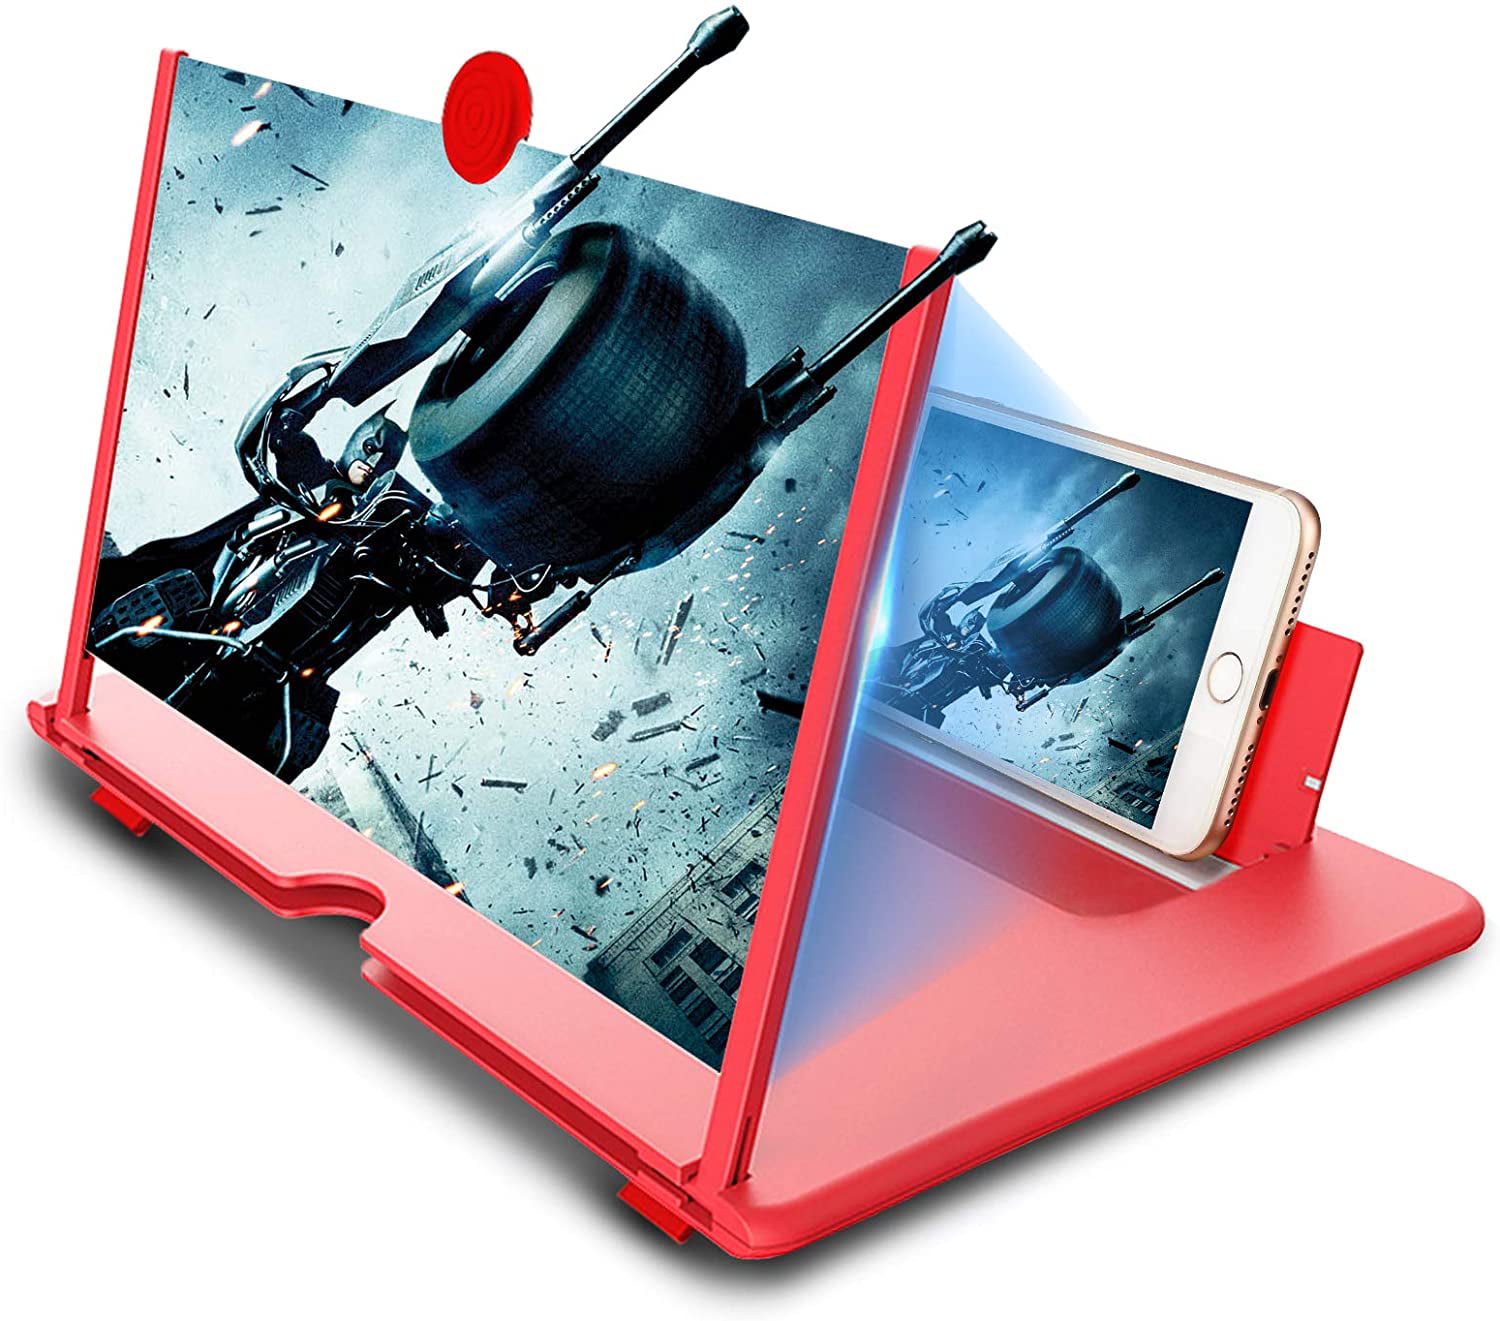 Folding Design 3D Video HD Magnifier Mobile Phone Screen Magnifier for Movies Videos Easy to Use Screen Magnifier